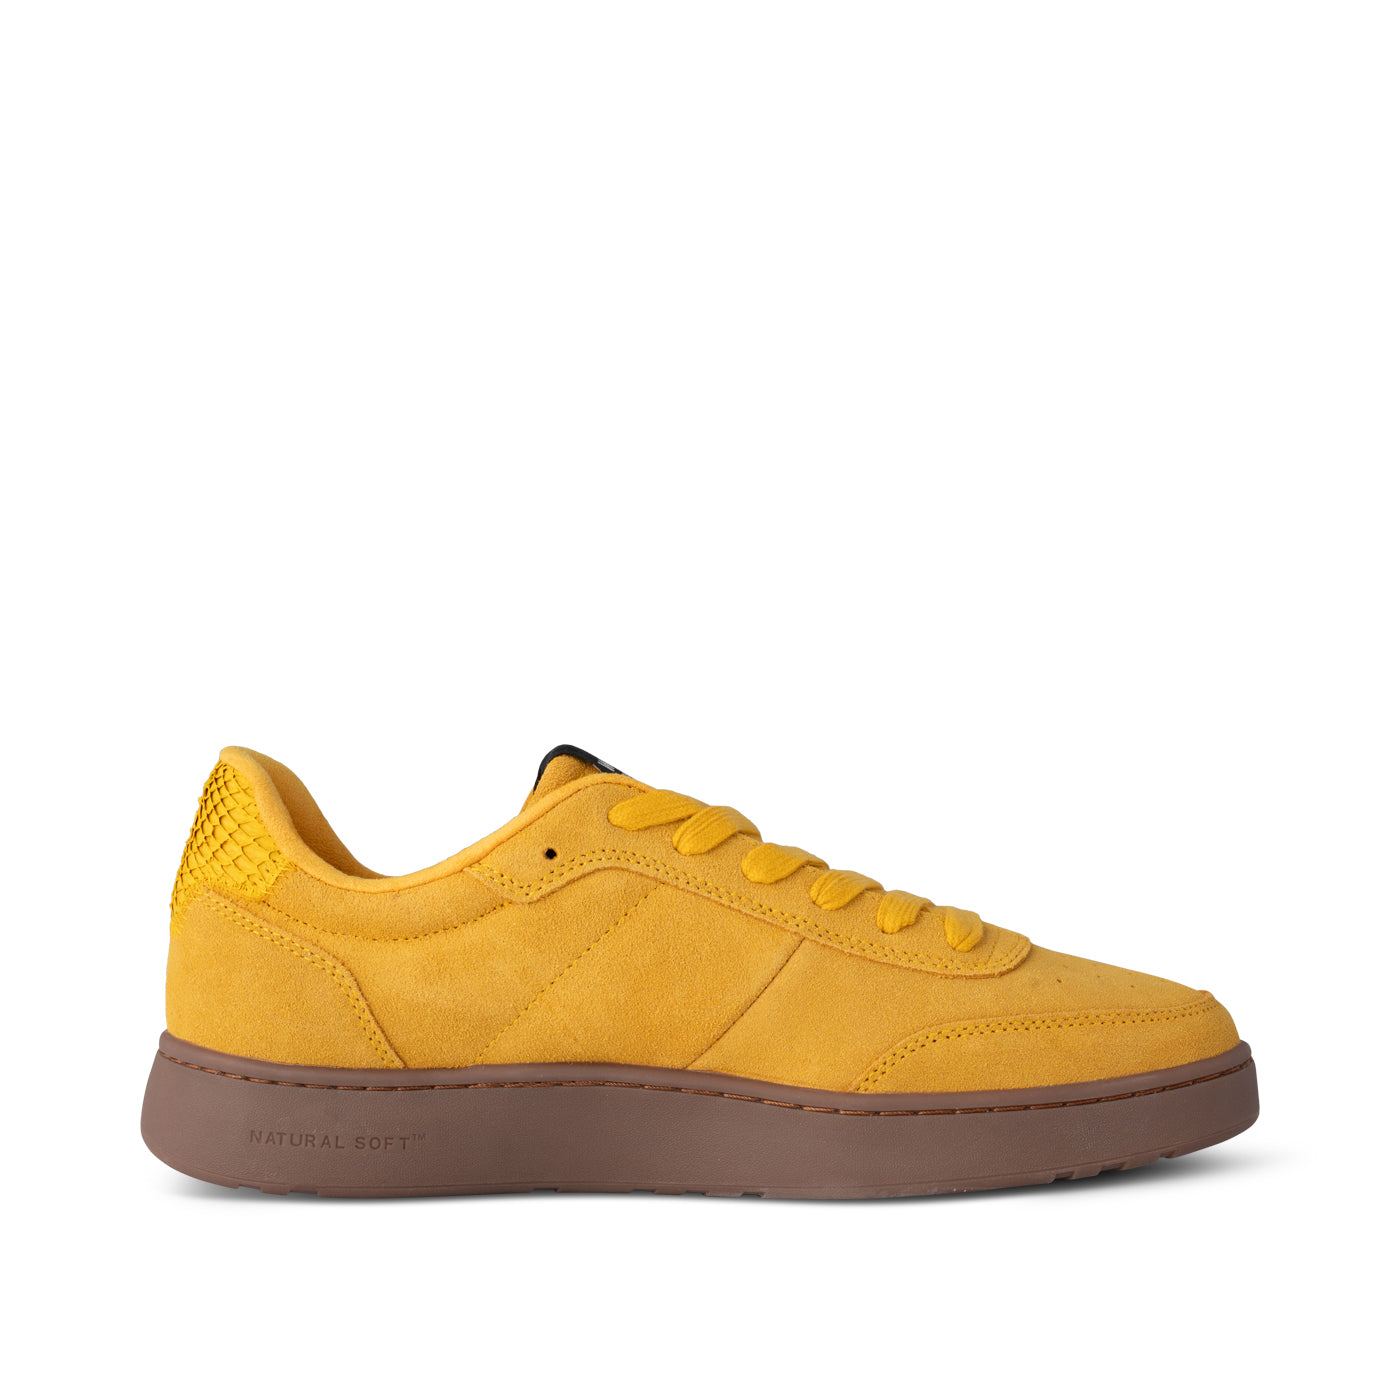 WODEN MENS Toke Sneakers 115 Old Gold